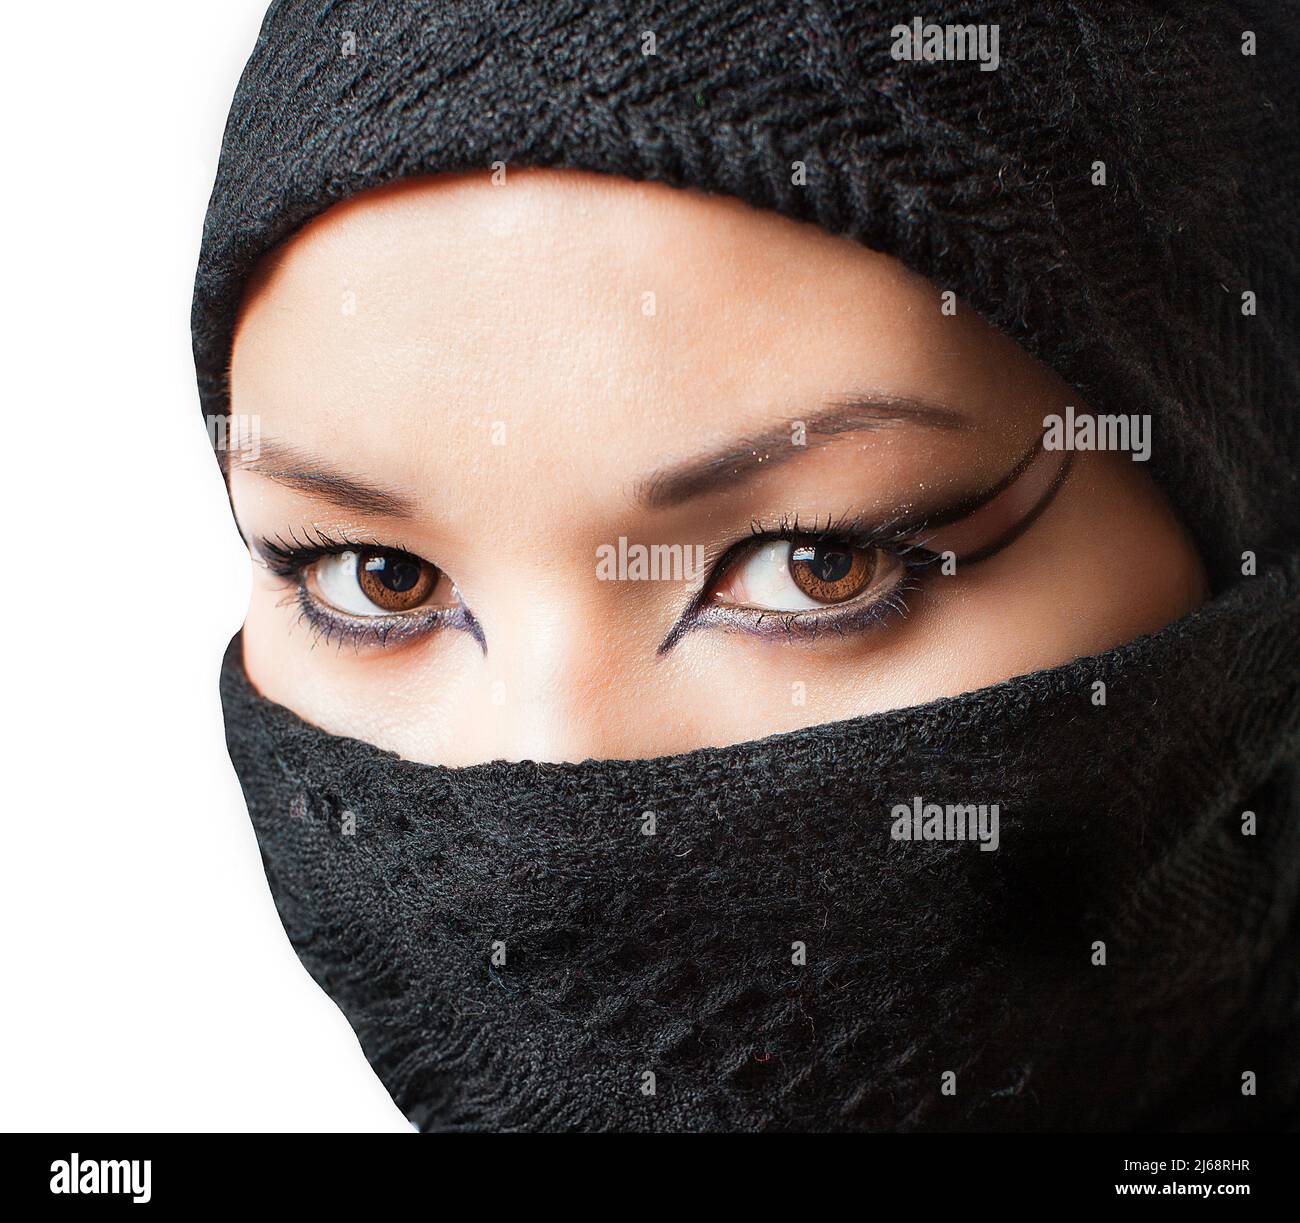 Portrait of Kazakh Islamic religious beautiful girl. Asian Muslim woman is wearing hijab scarf with make-up Stock Photo